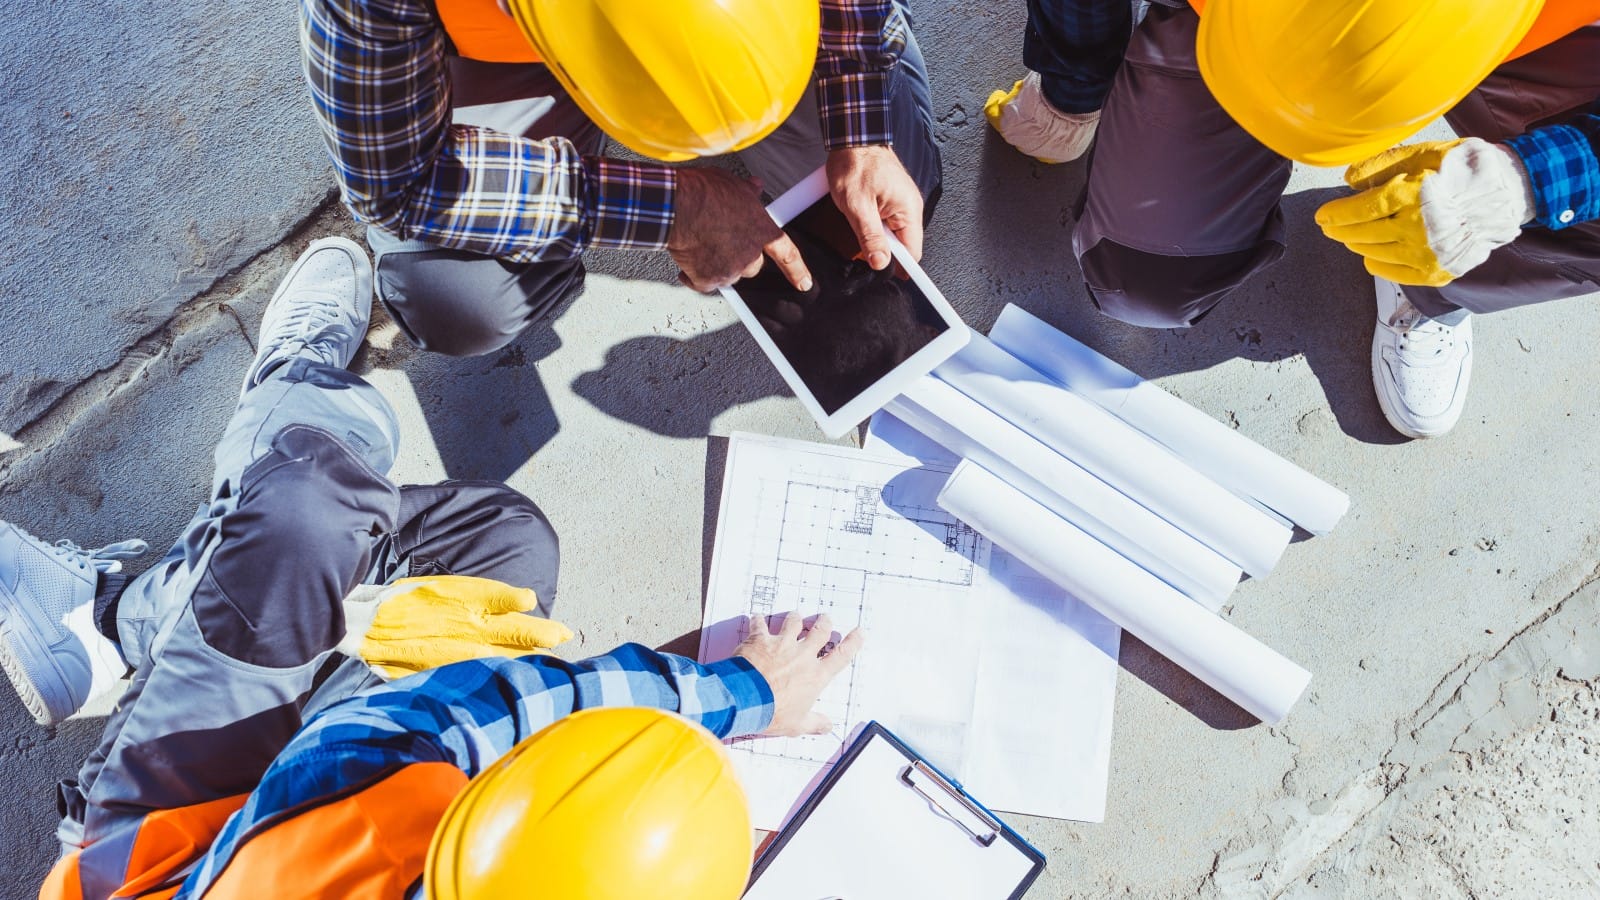 Top-down view of engineers in hard hats reviewing blueprints and a digital tablet on a construction site.